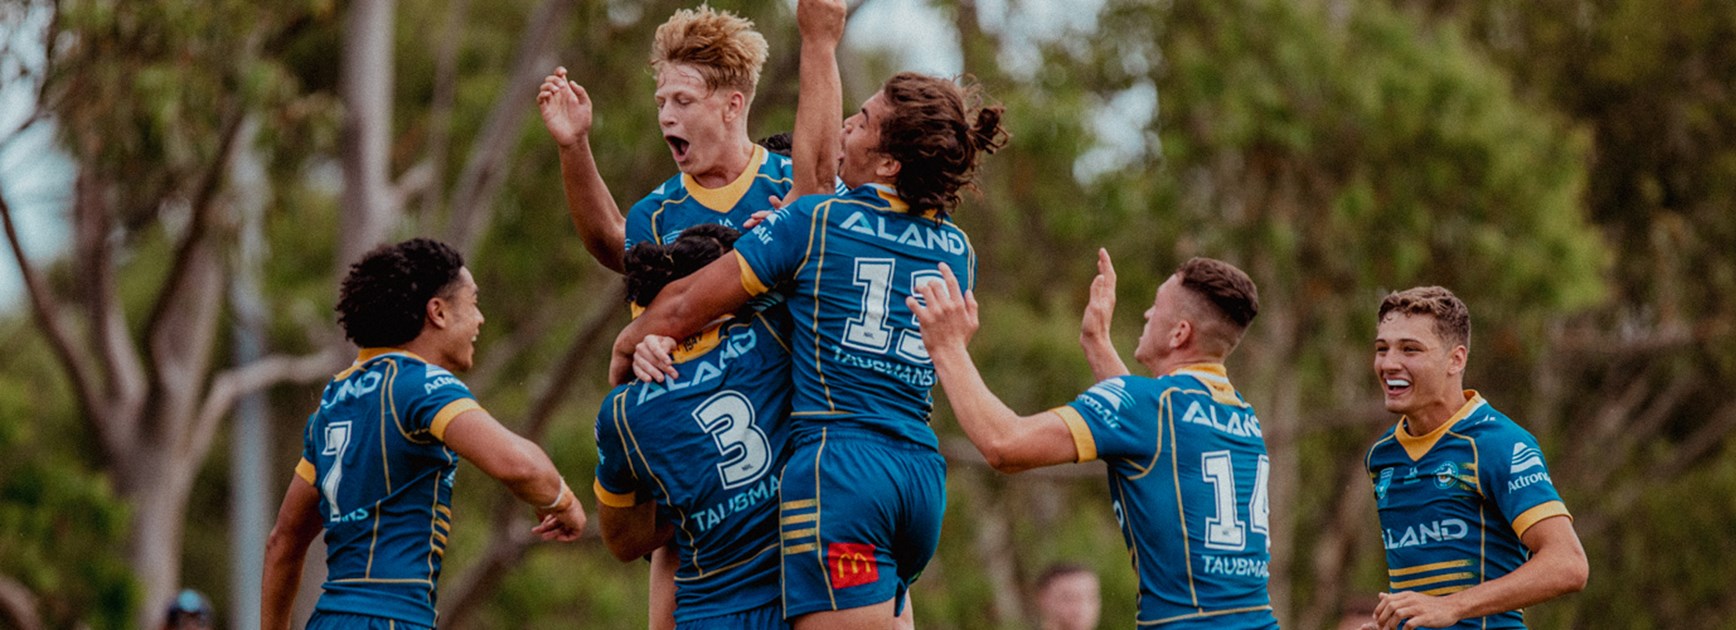 Junior Reps Round 4 Wrap-Up: Eels seal another clean sweep